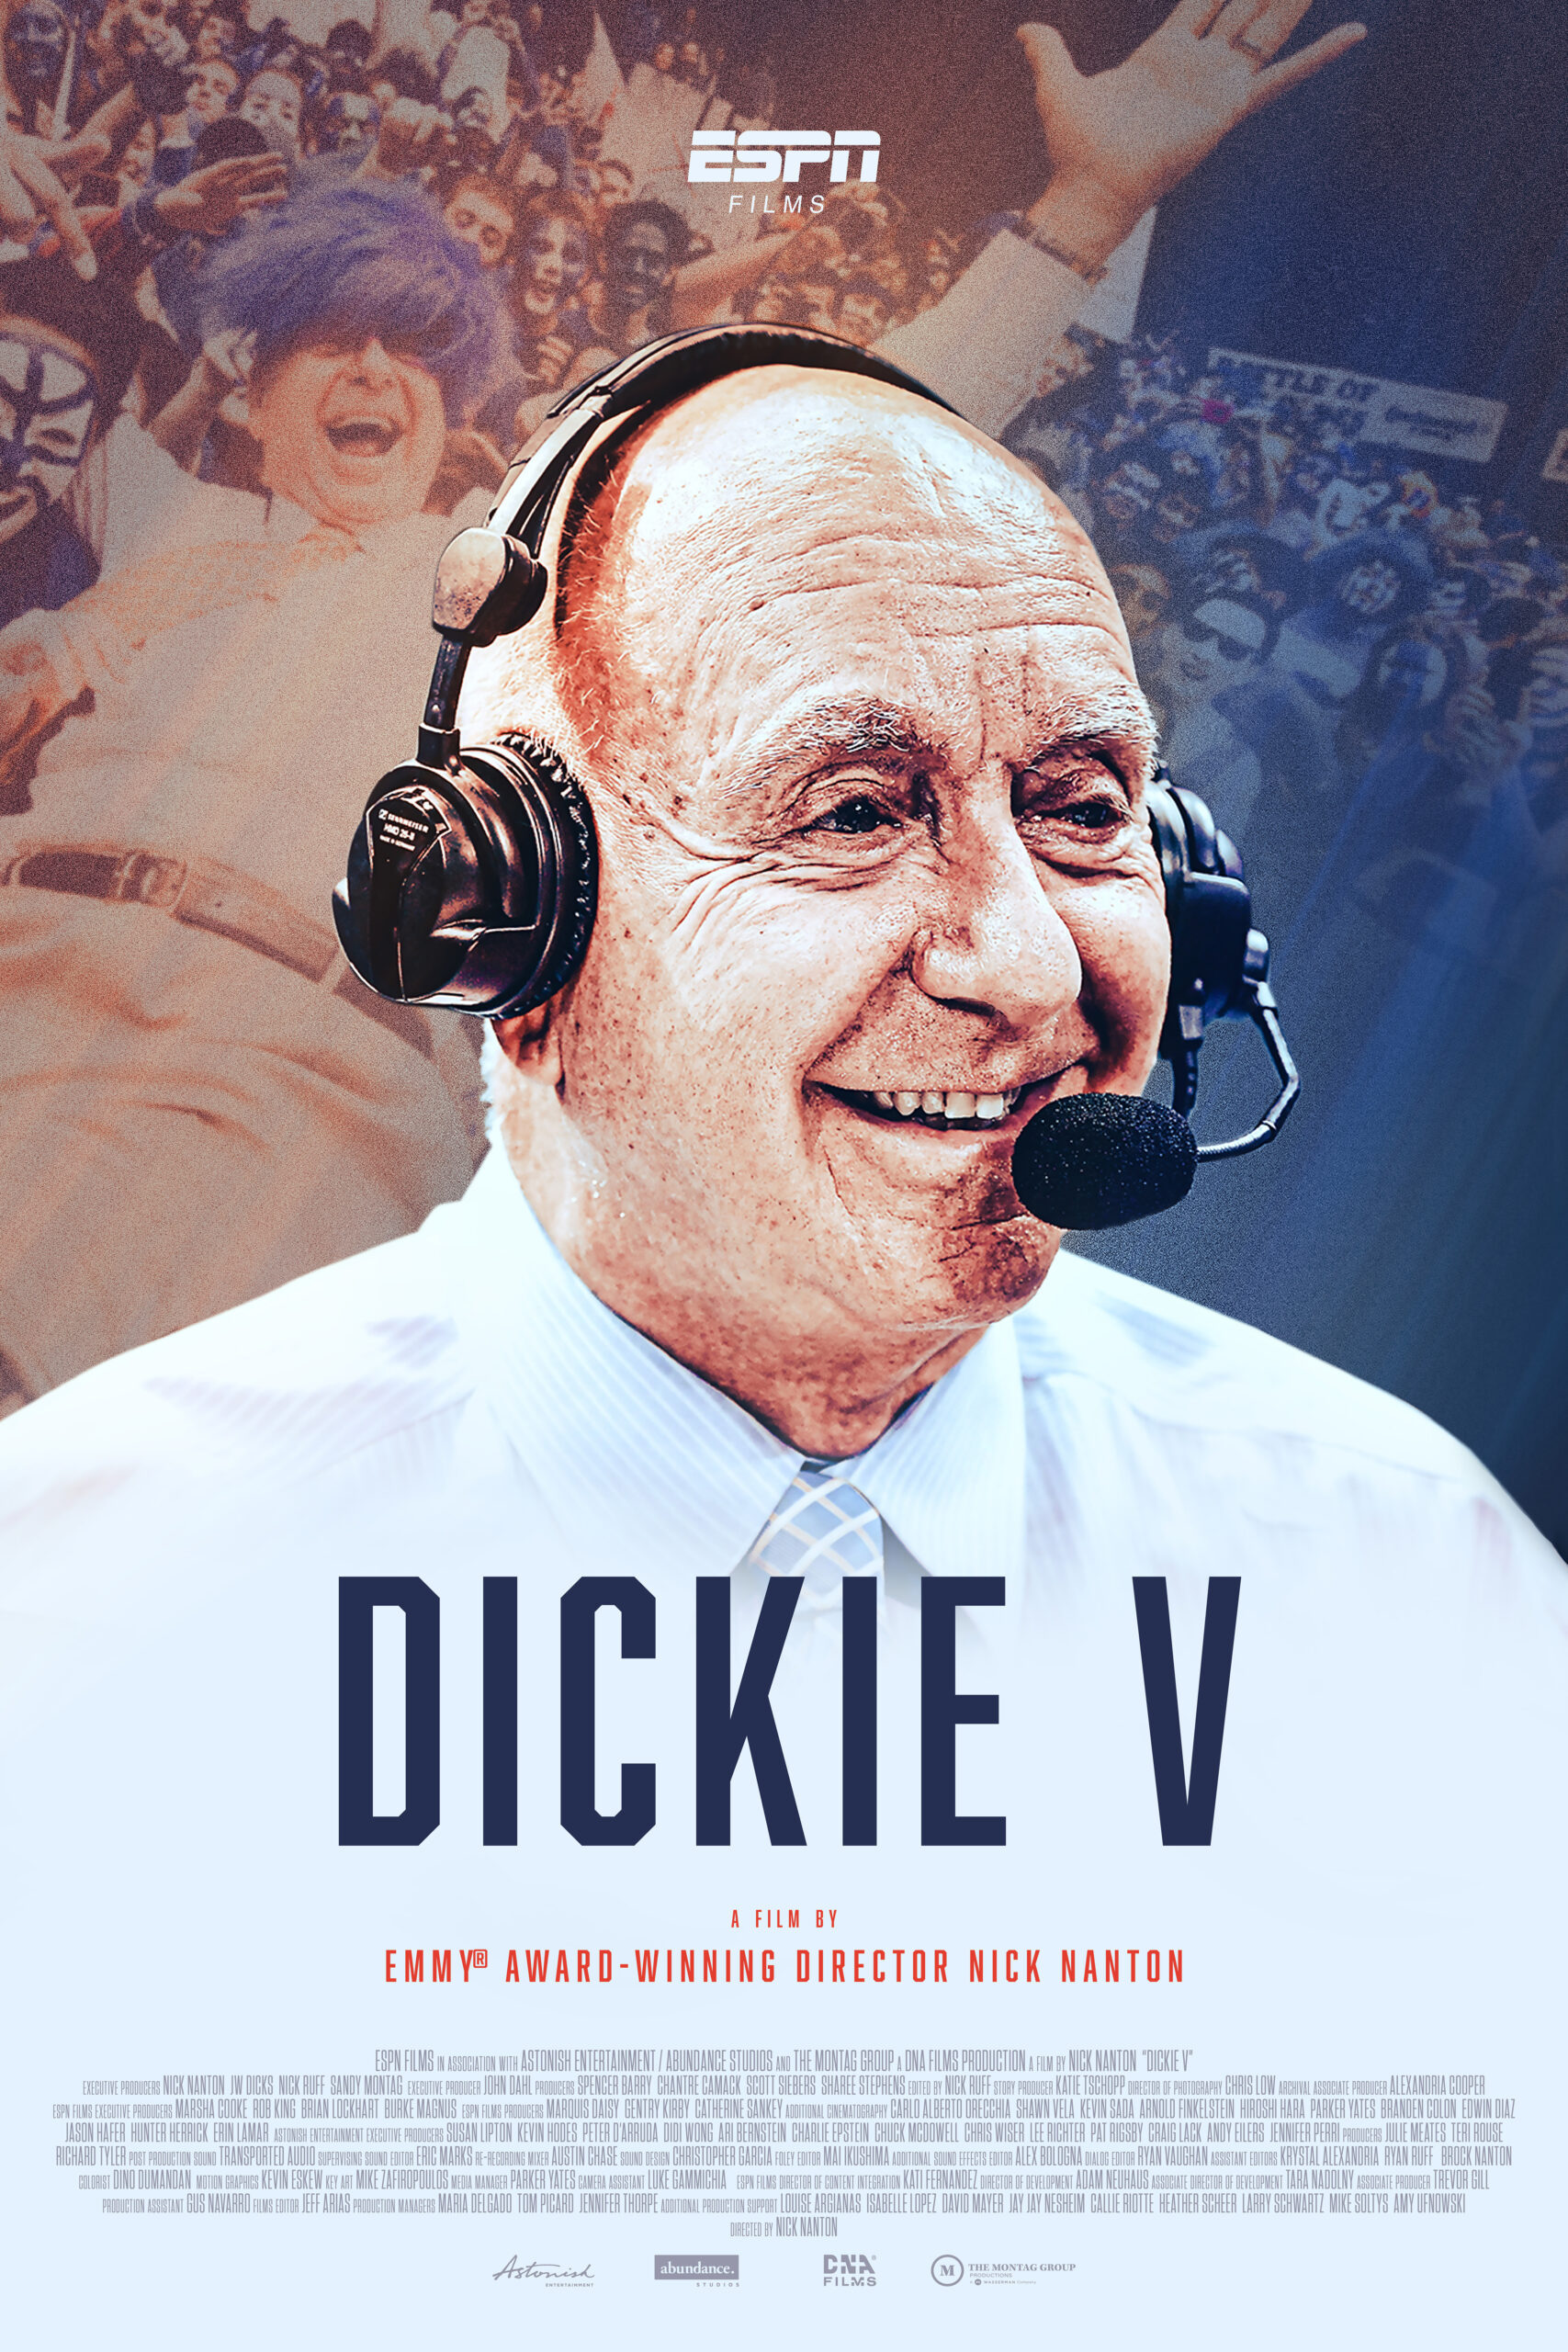 An image of the poster for "Dickie V", an Abundance Films documentary.